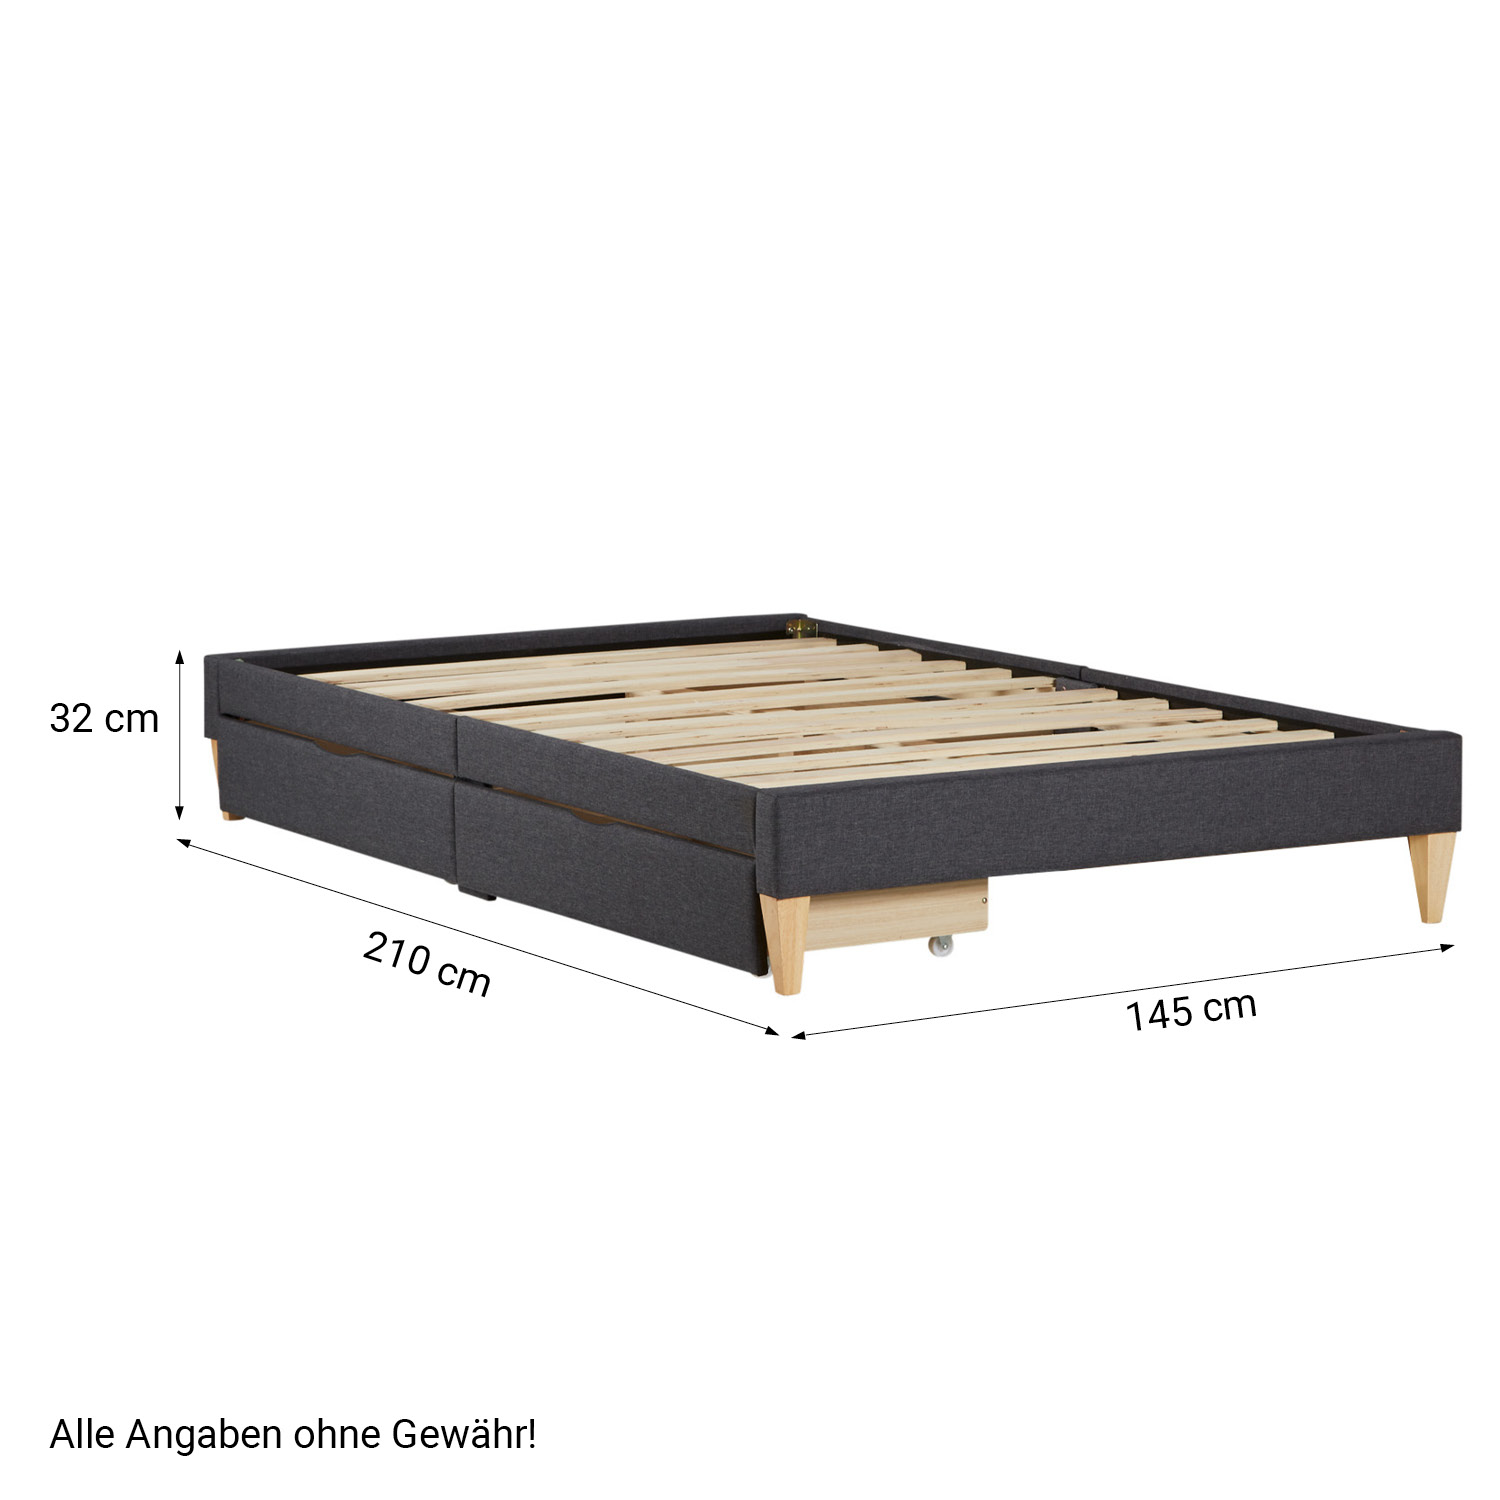 Upholstered Bed 140x200 cm with 2 Drawers Slatts Grey Fabric Bed Double Bed Futon Bed Frame Platform Bed